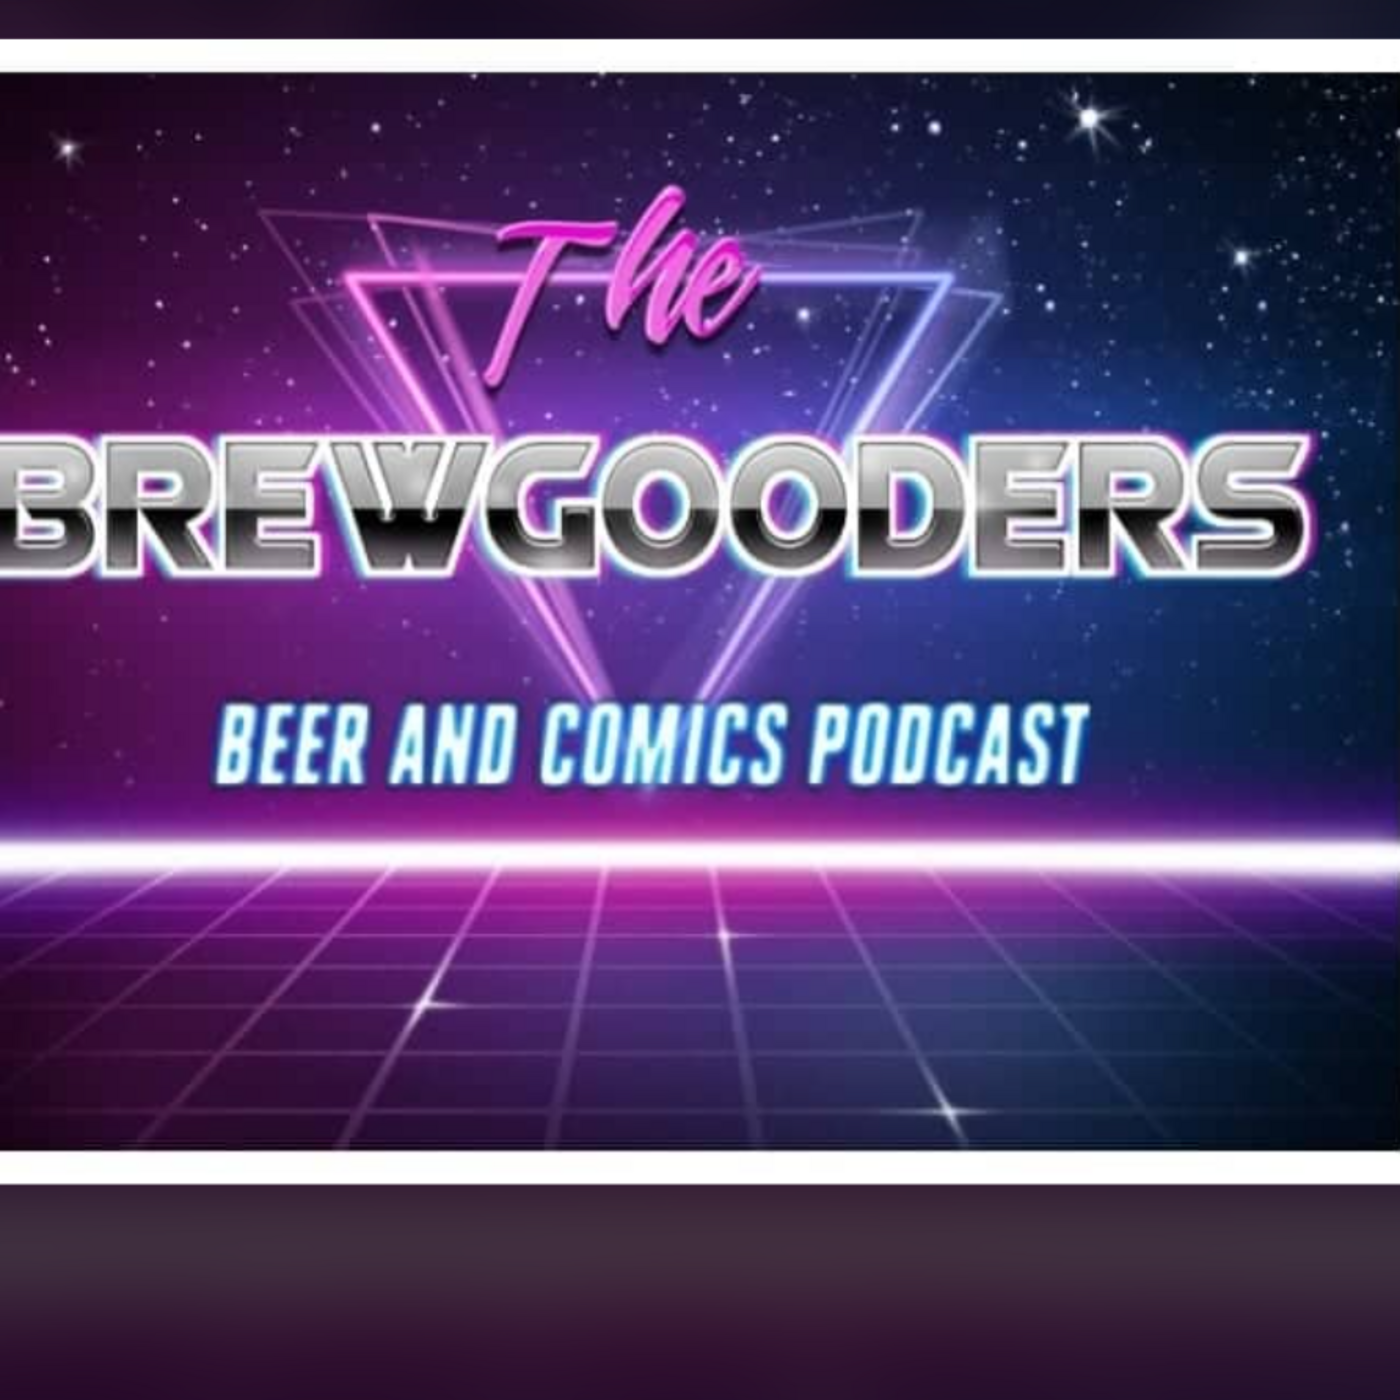 The Brewgooders